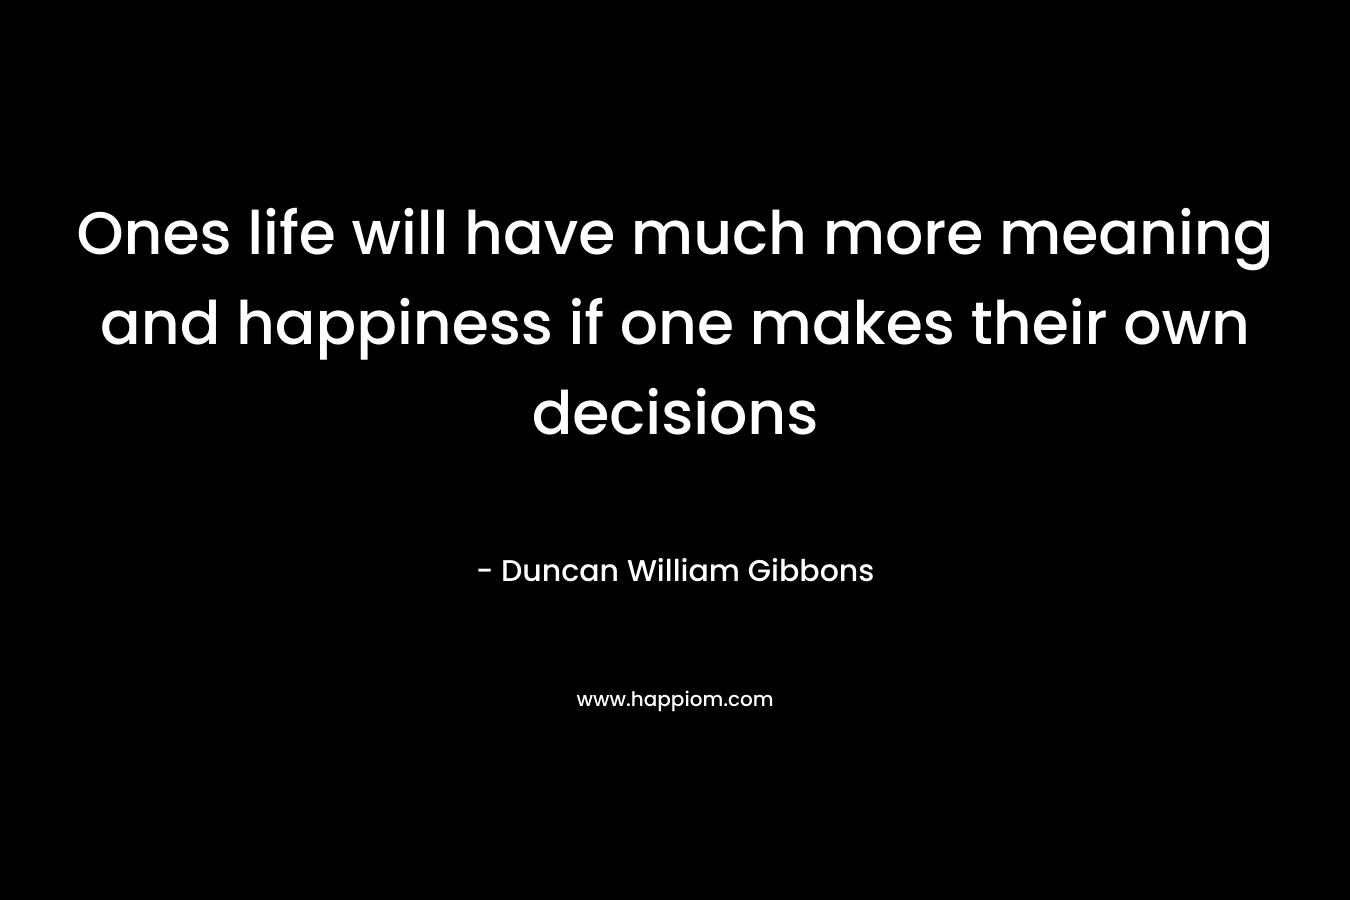 Ones life will have much more meaning and happiness if one makes their own decisions